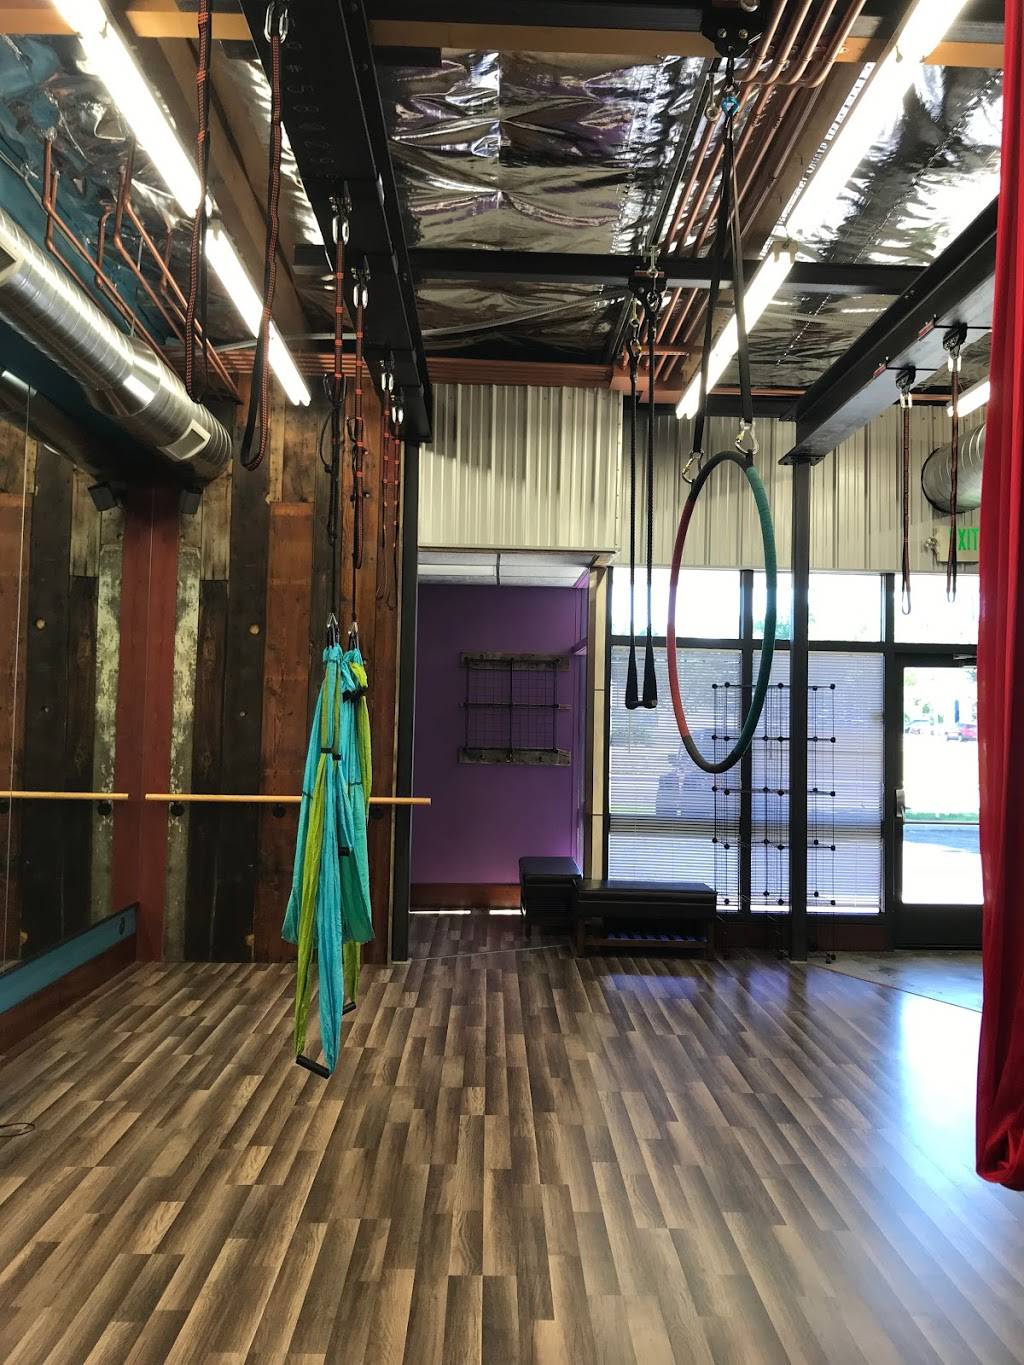 Boise Aerial & Fitness | 270 S Cole Rd #0934, Boise, ID 83709 | Phone: (208) 869-3496